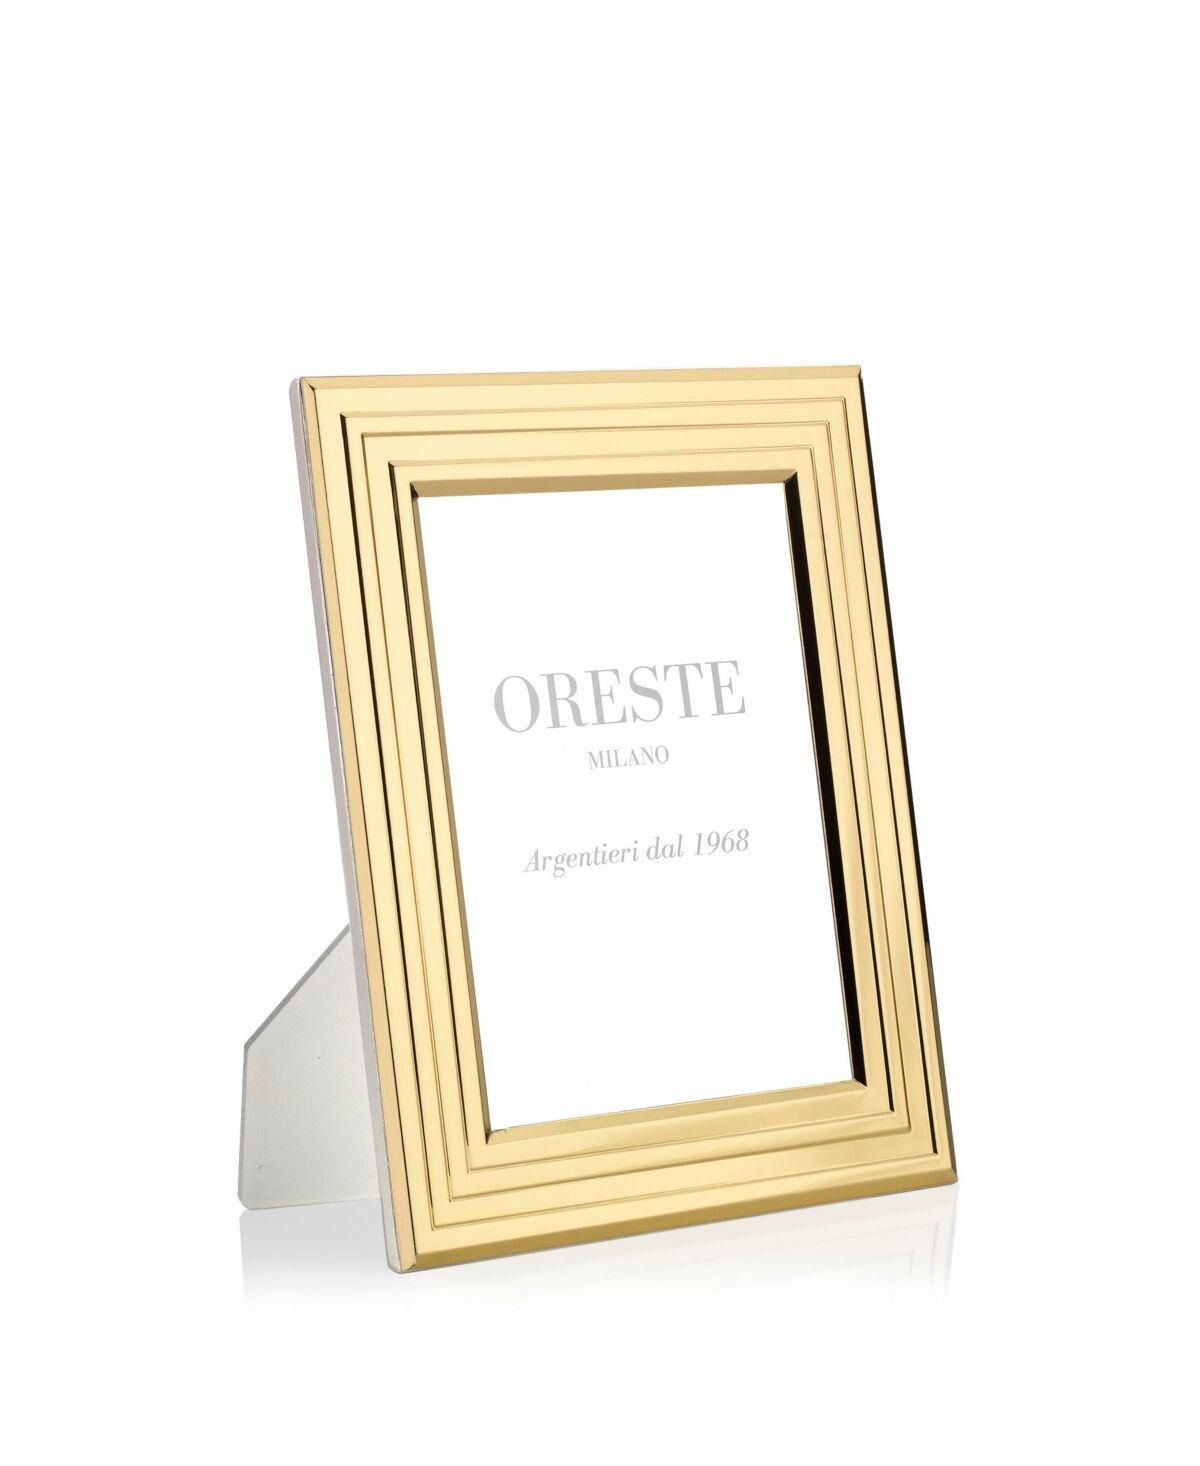 Oreste Milano 5x7 Gold Plated Picture Frame on a White Lacquered Wooden Back - Gold